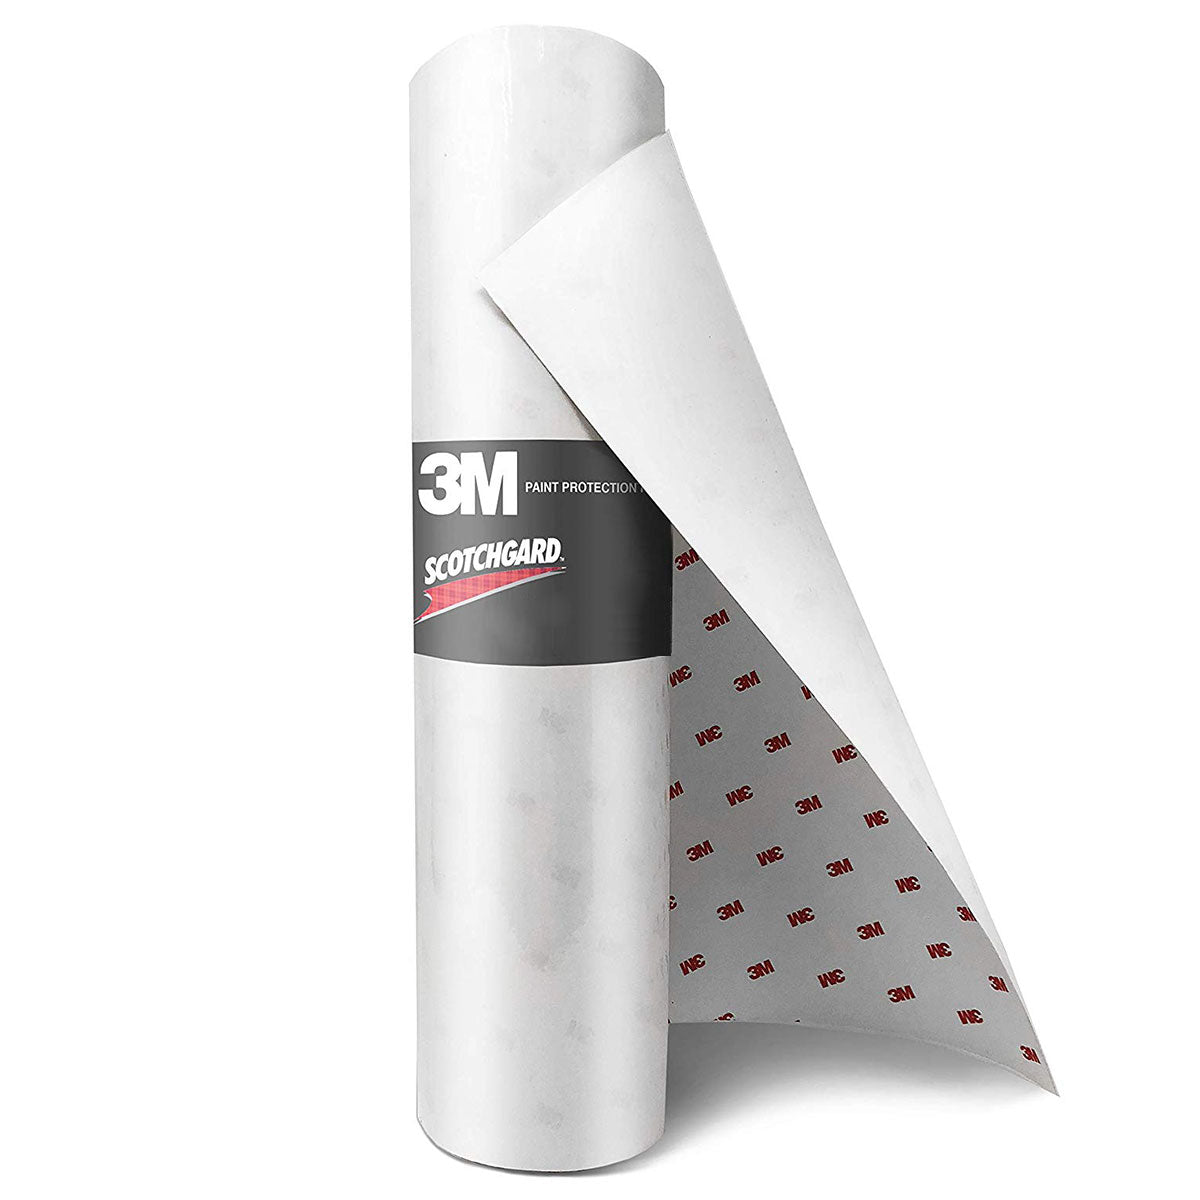 3M Scotchgard Pro Series Paint Protection Gloss Clear Film 12 In x 3' FT  Roll